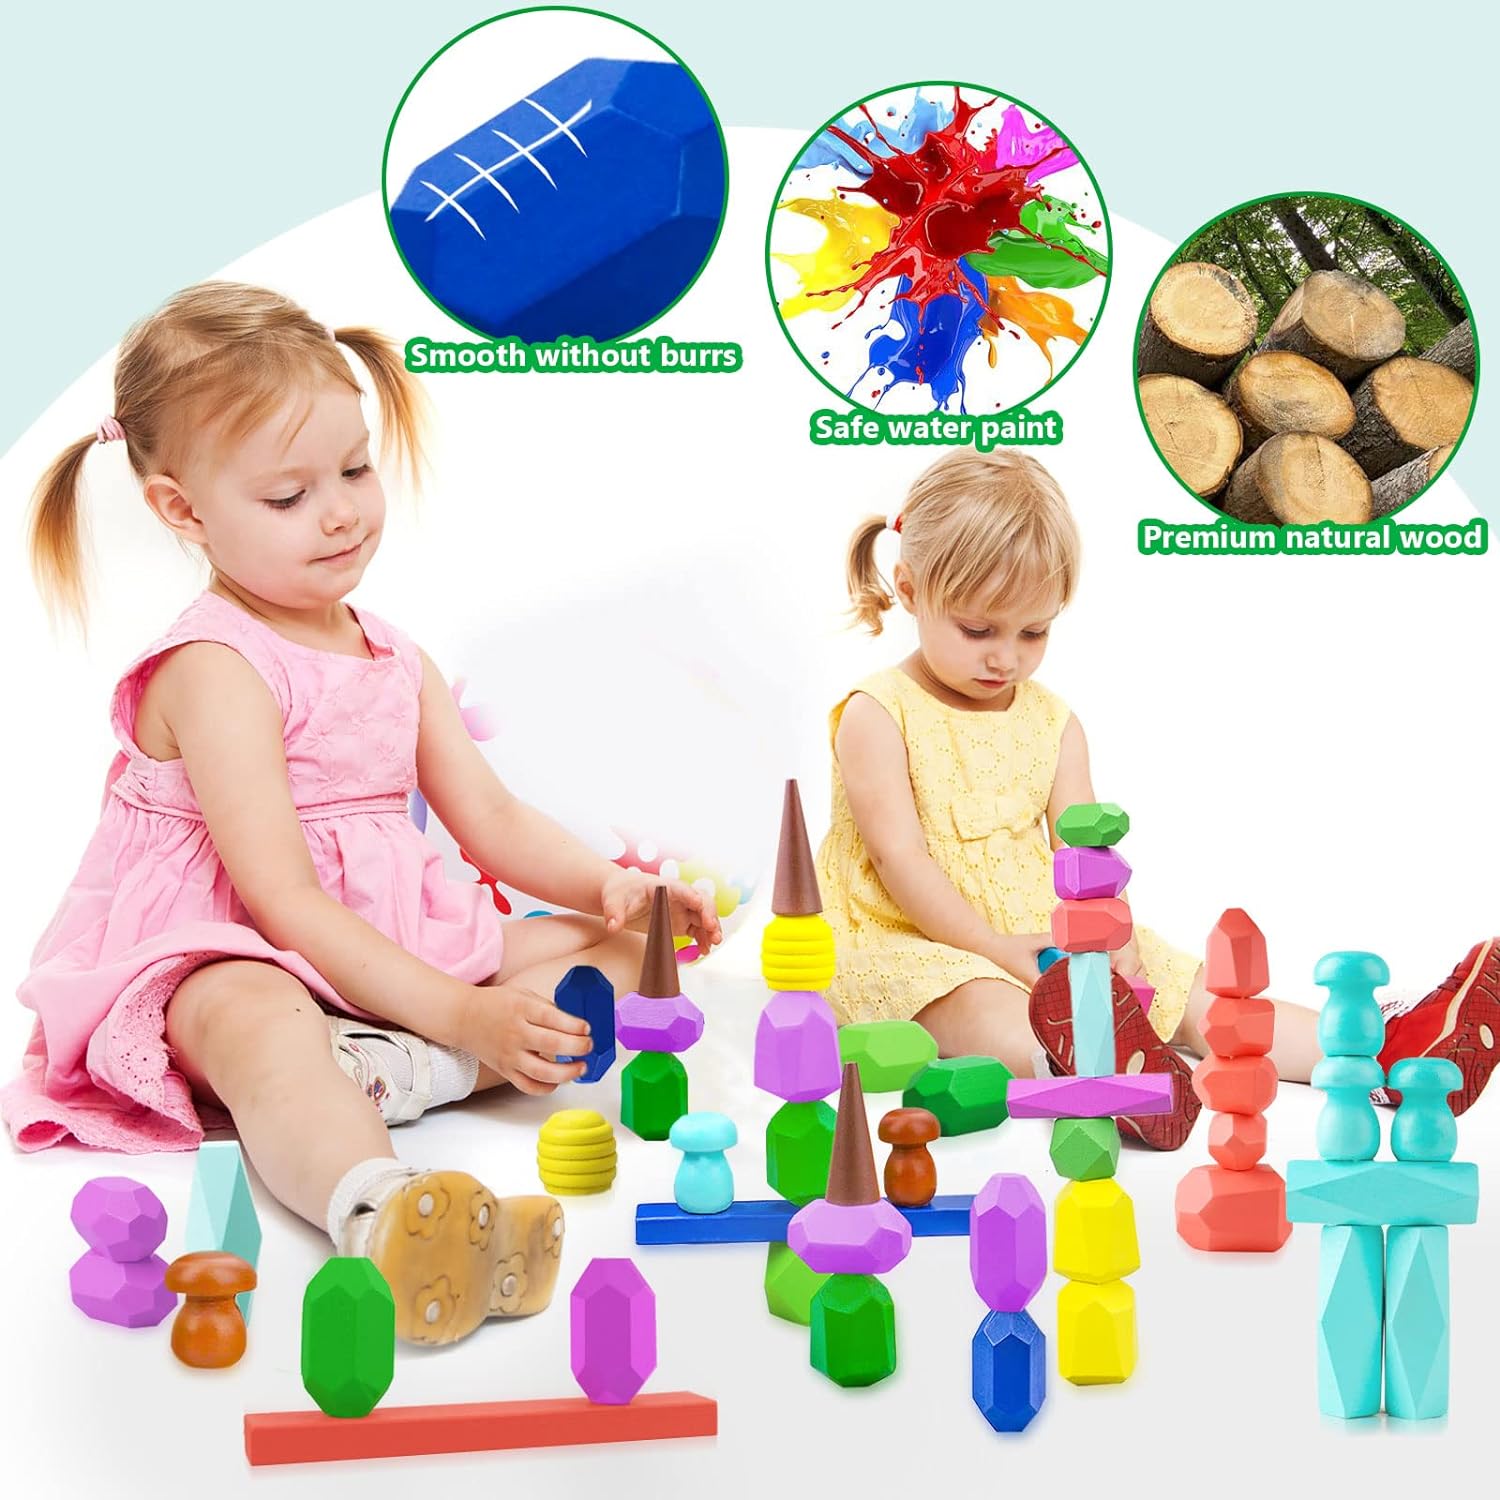 Toys for 3 Year Old Boys Girls, 36 PCS Colorful Wooden Sorting Stacking Rocks, Sensory Toys for Toddlers 3-4 Montessori Building Blocks for Kids Ages 4-8, Preschool Learning Activities for Home School : Toys Games